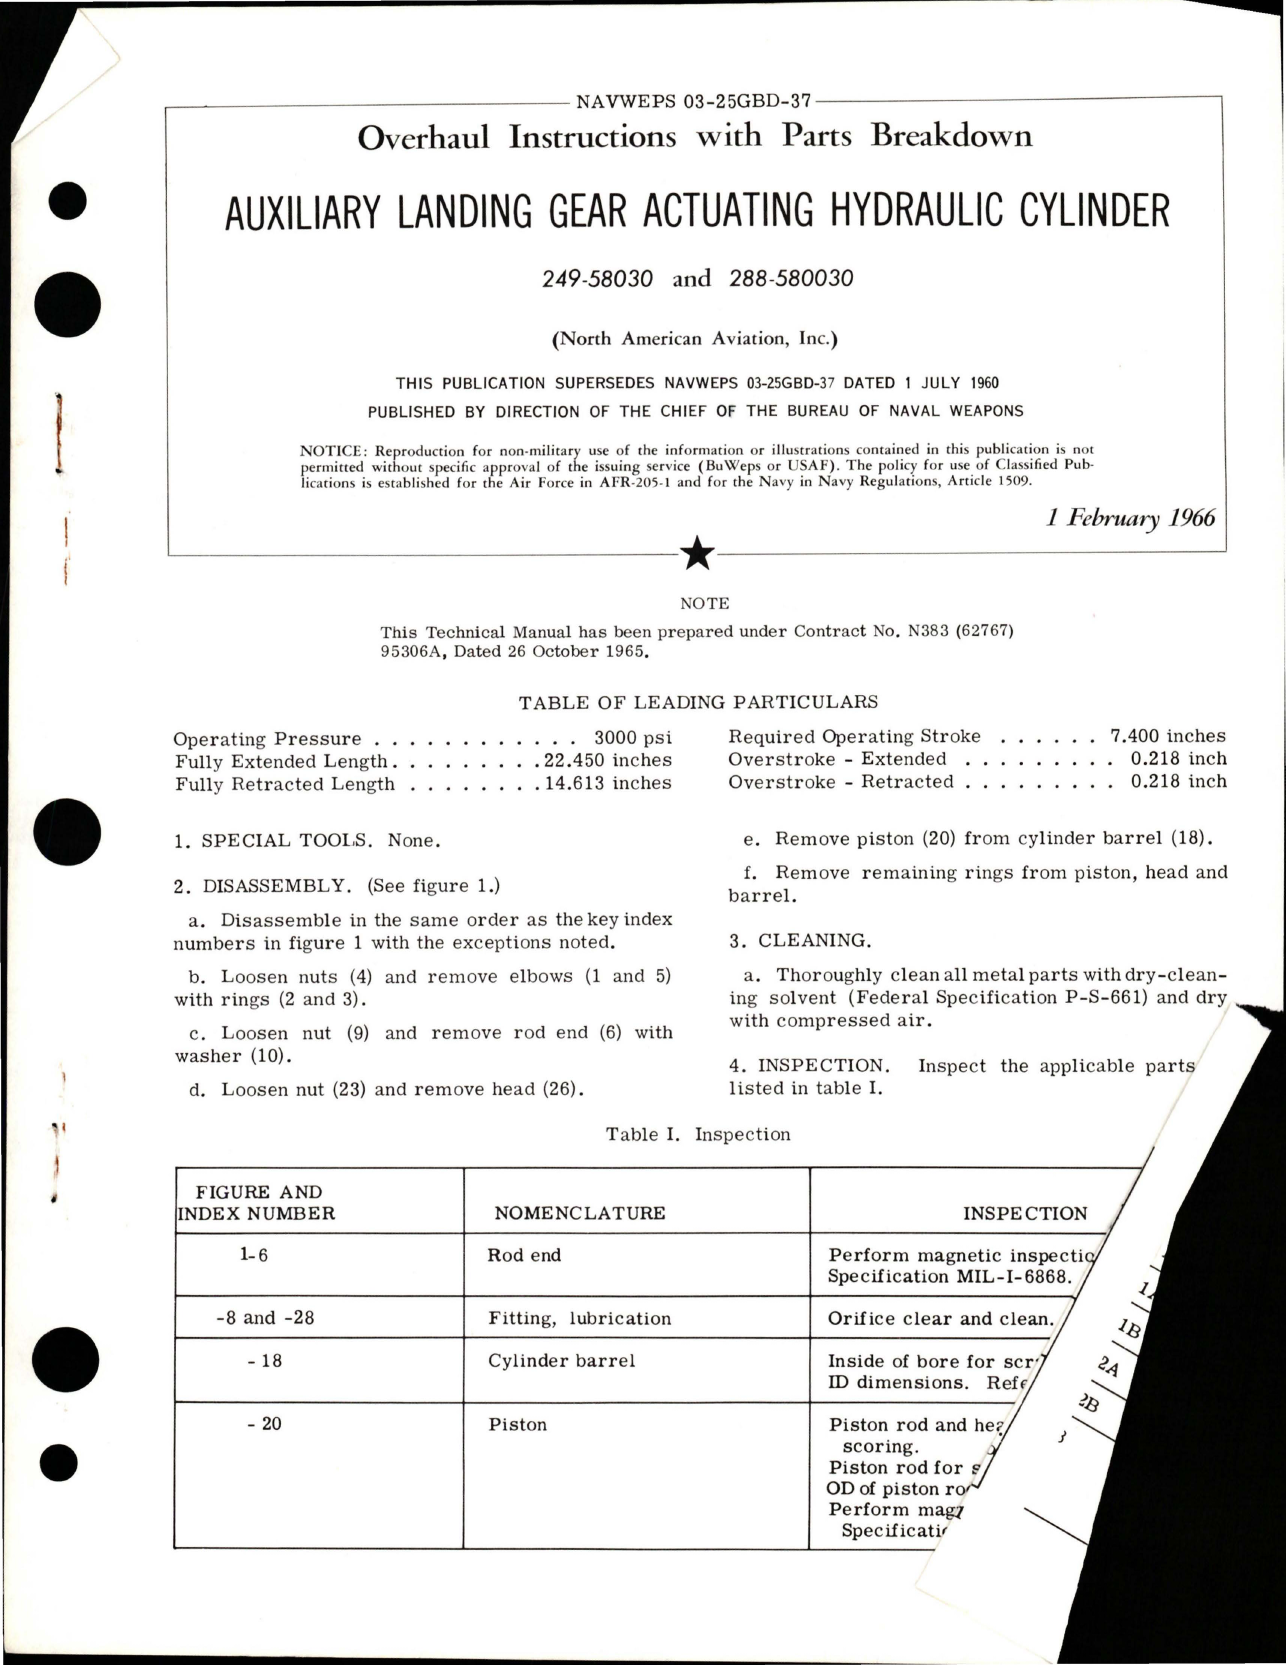 Sample page 1 from AirCorps Library document: Overhaul Instructions with Parts Breakdown for Auxiliary Landing Gear Actuating Hydraulic Cylinder - 249-58030 and 288-580030 